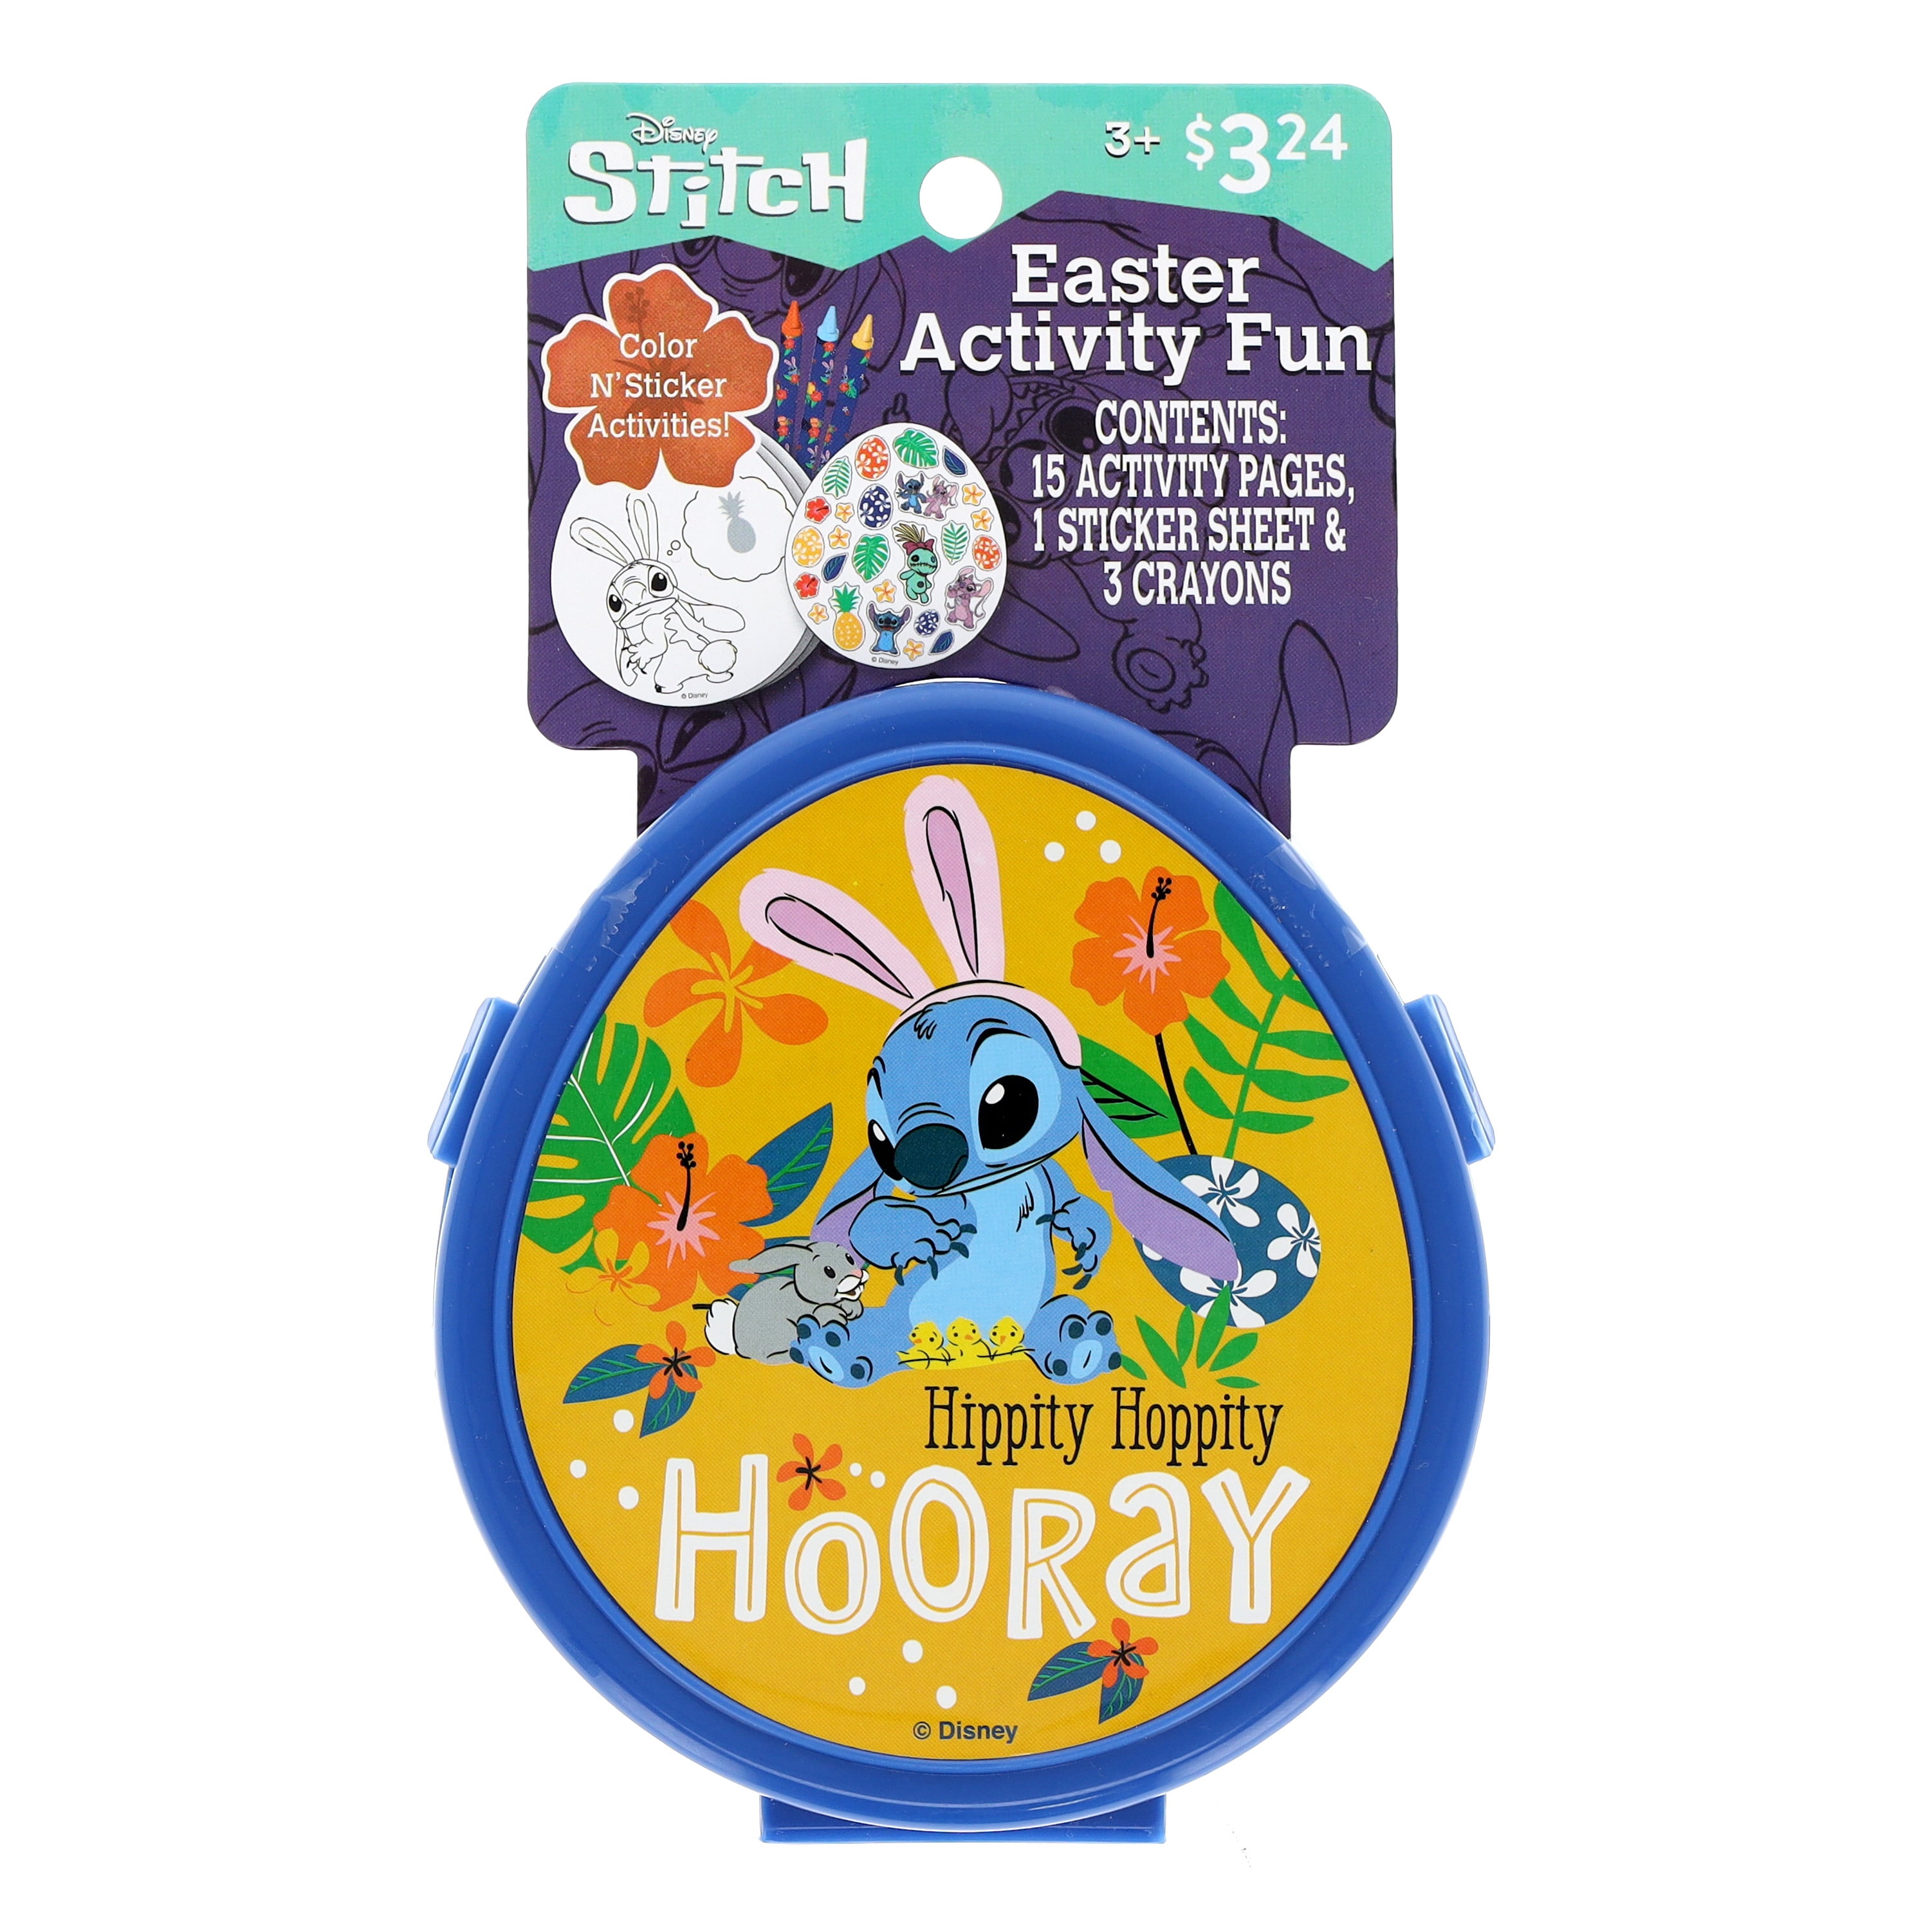 Way to Celebrate Frozen Large Activity Plastic Egg, for Female Child Ages  3+ 